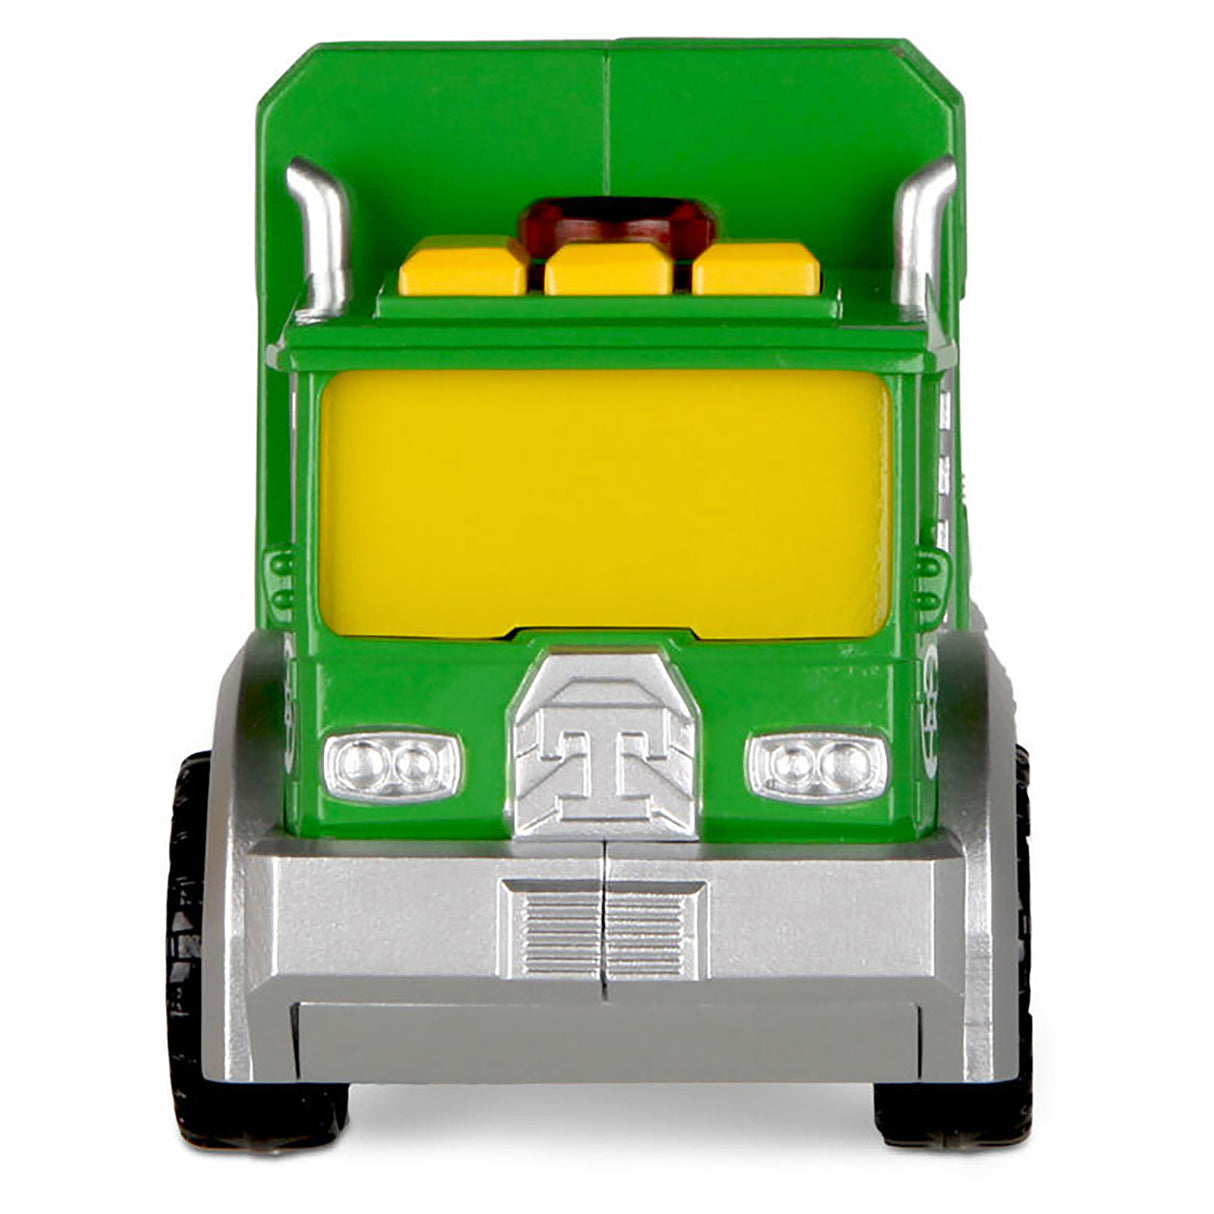 Tonka Mighty Force Lights & Sounds Garbage Truck